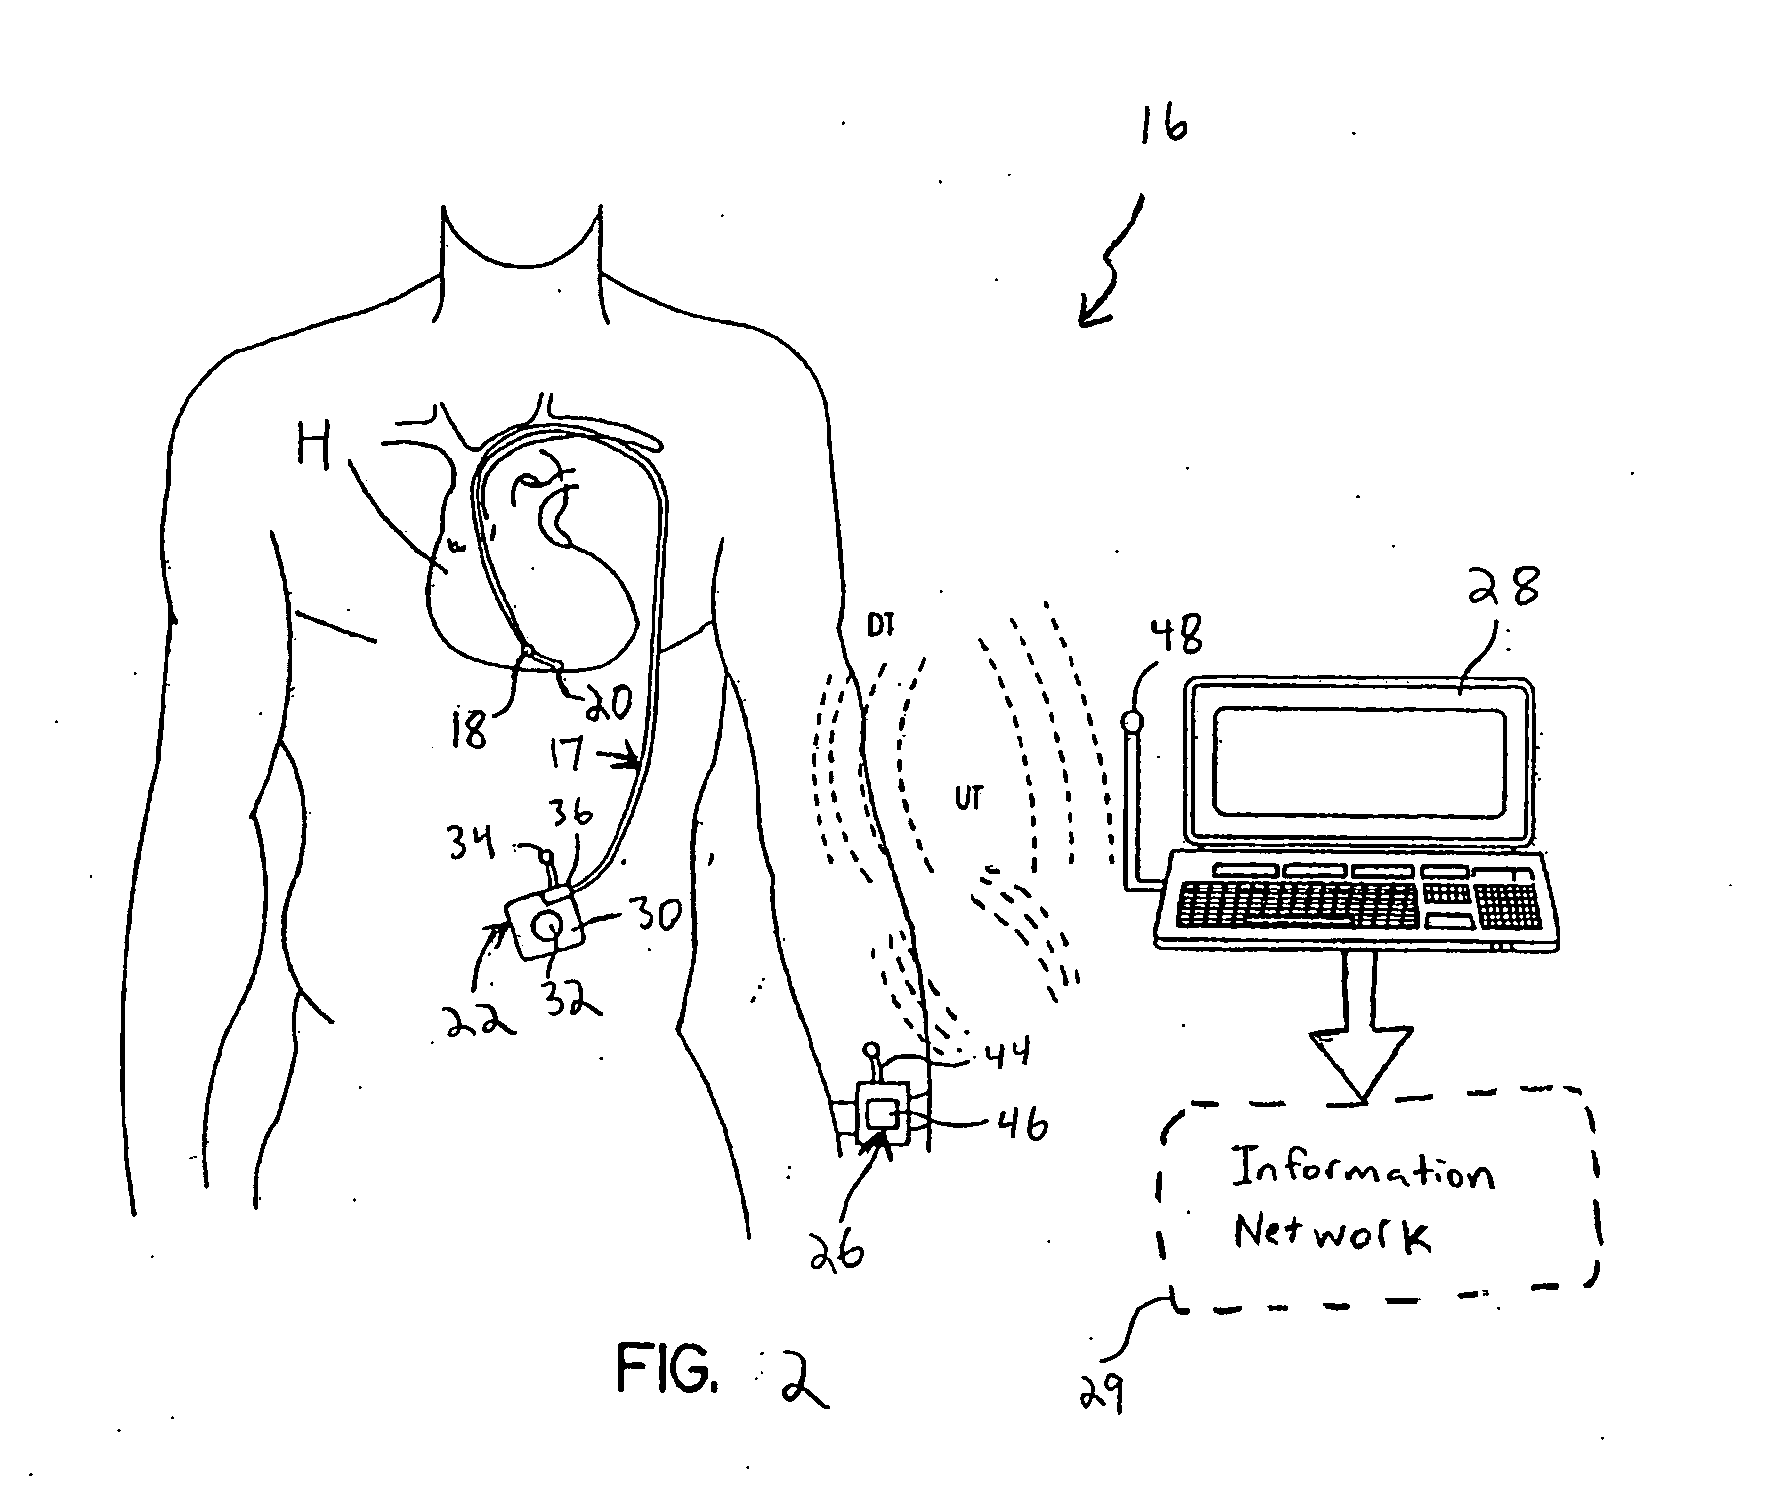 System and method for detecting cardiovascular health conditions using hemodynamic pressure waveforms